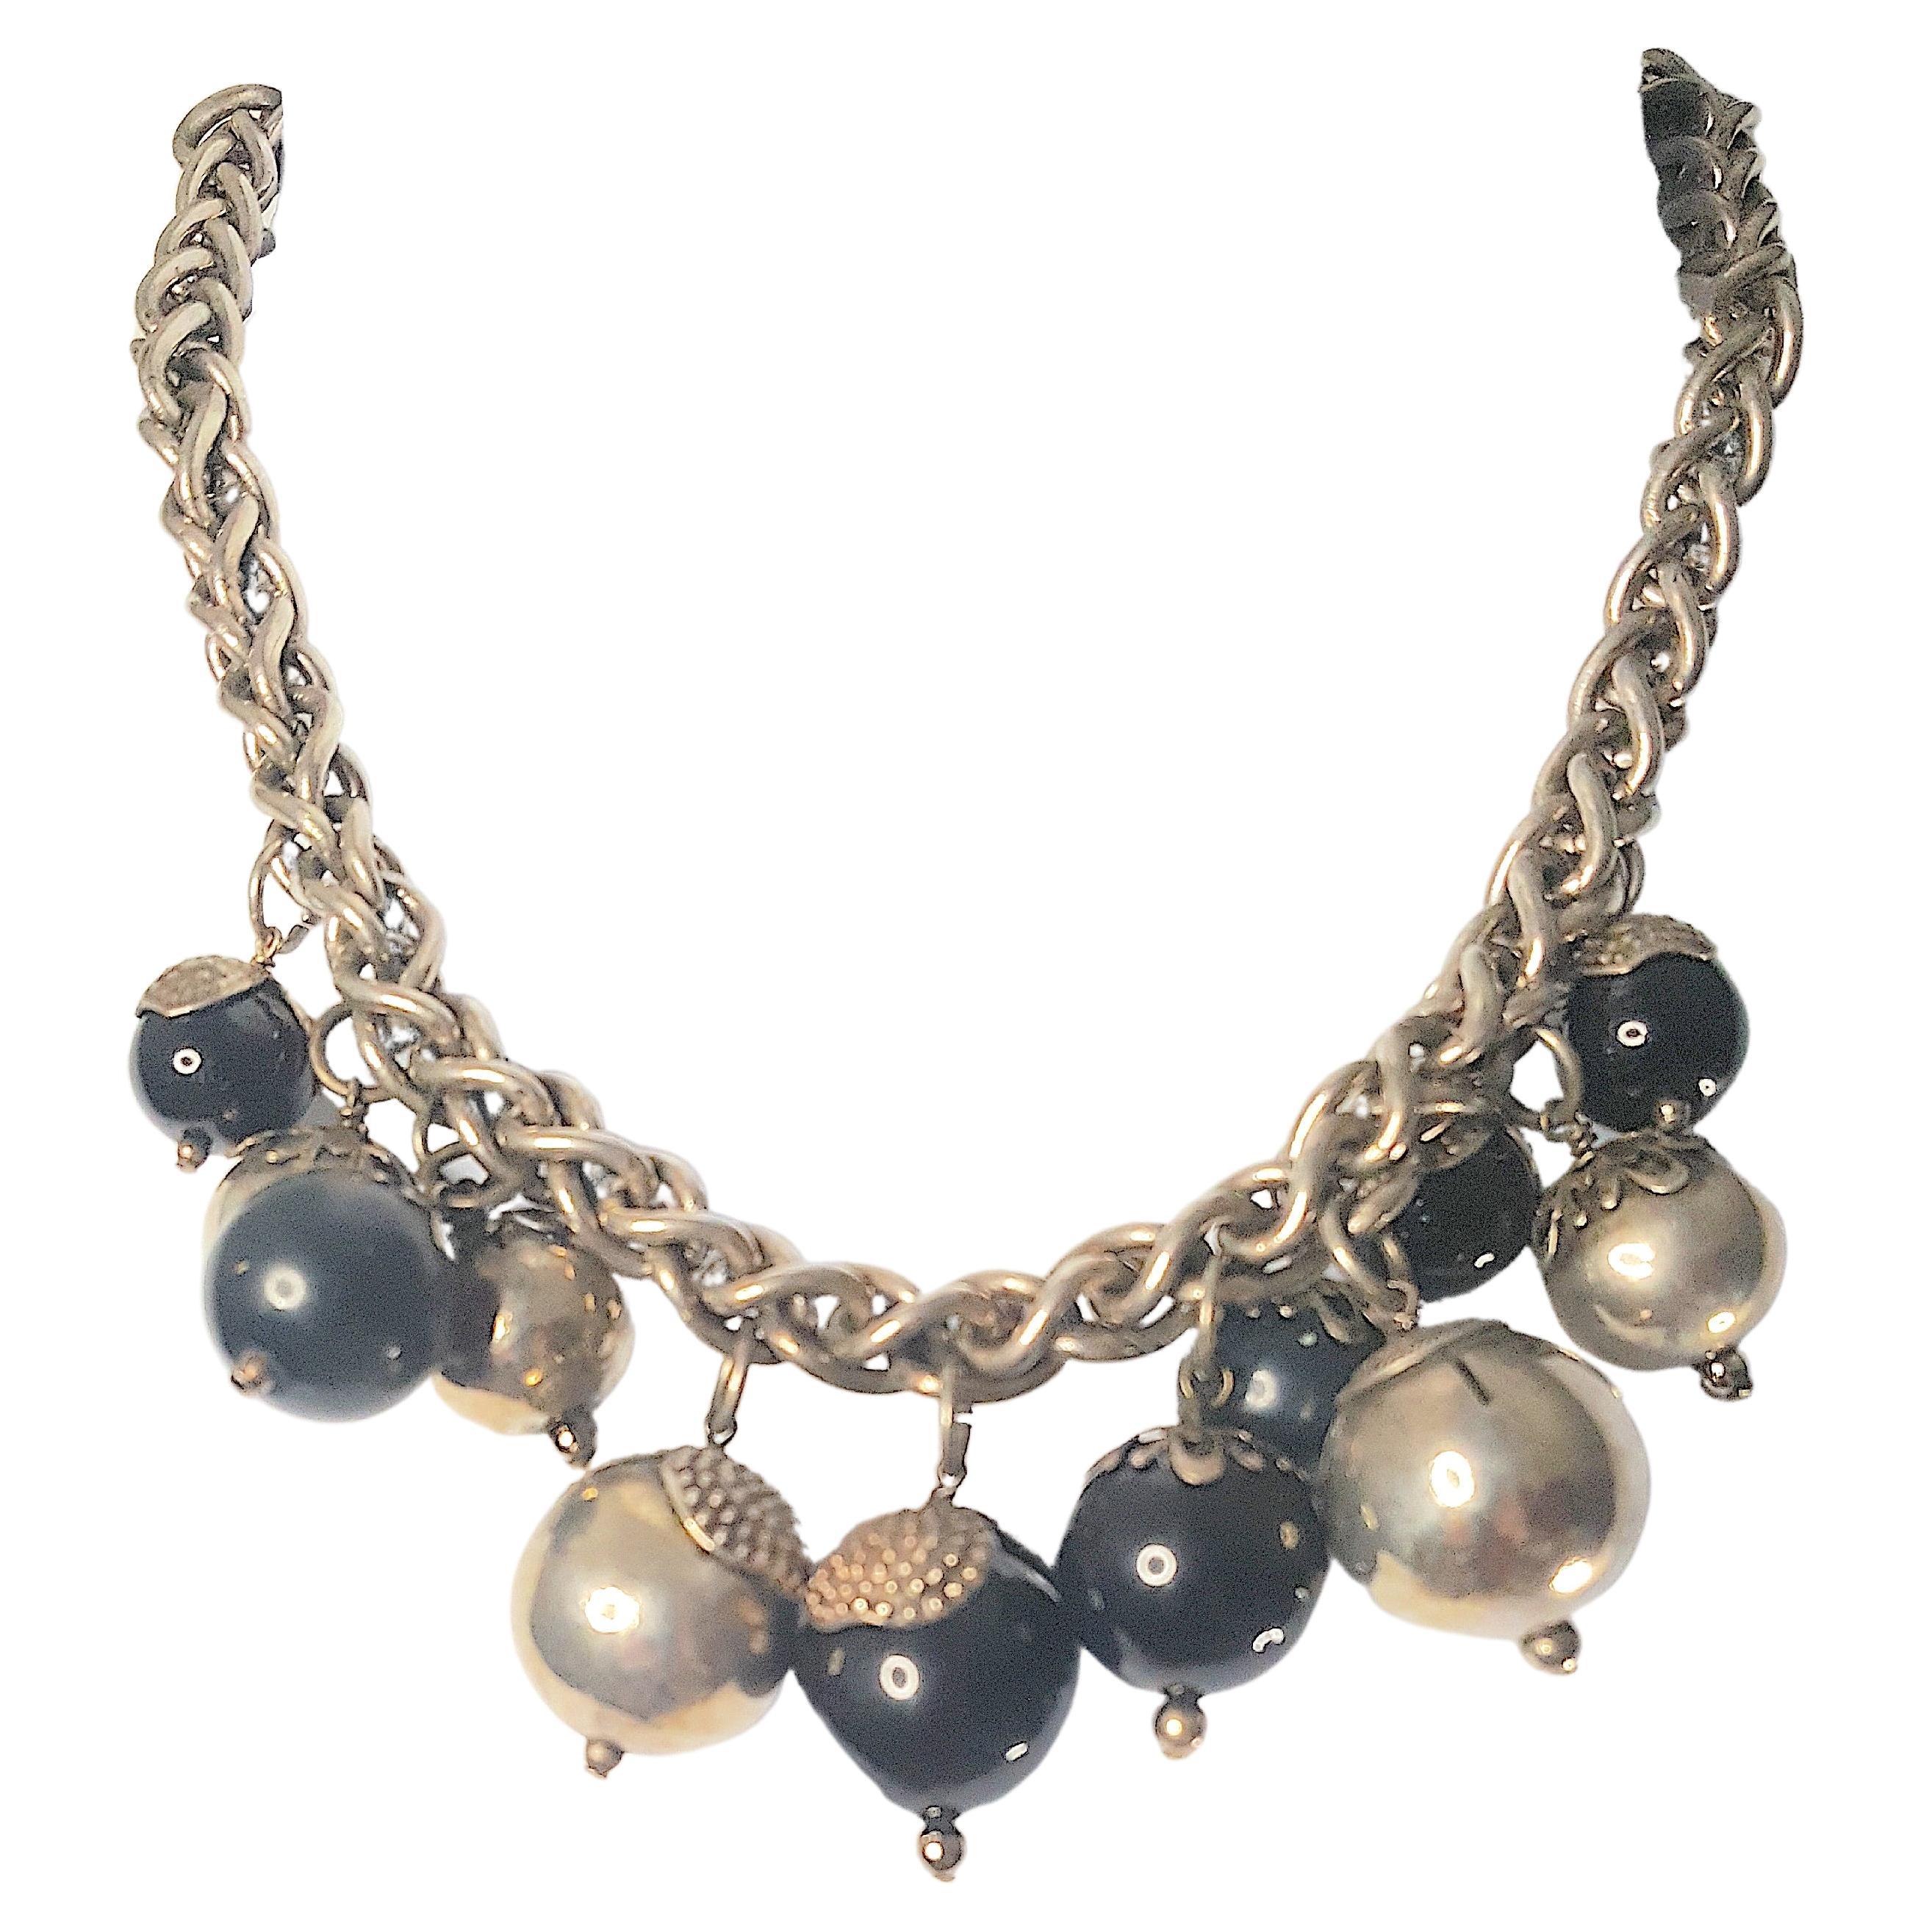 Couture Late1920s ChanelRousseletStyle PearlescentPendants SilverChain Necklace For Sale